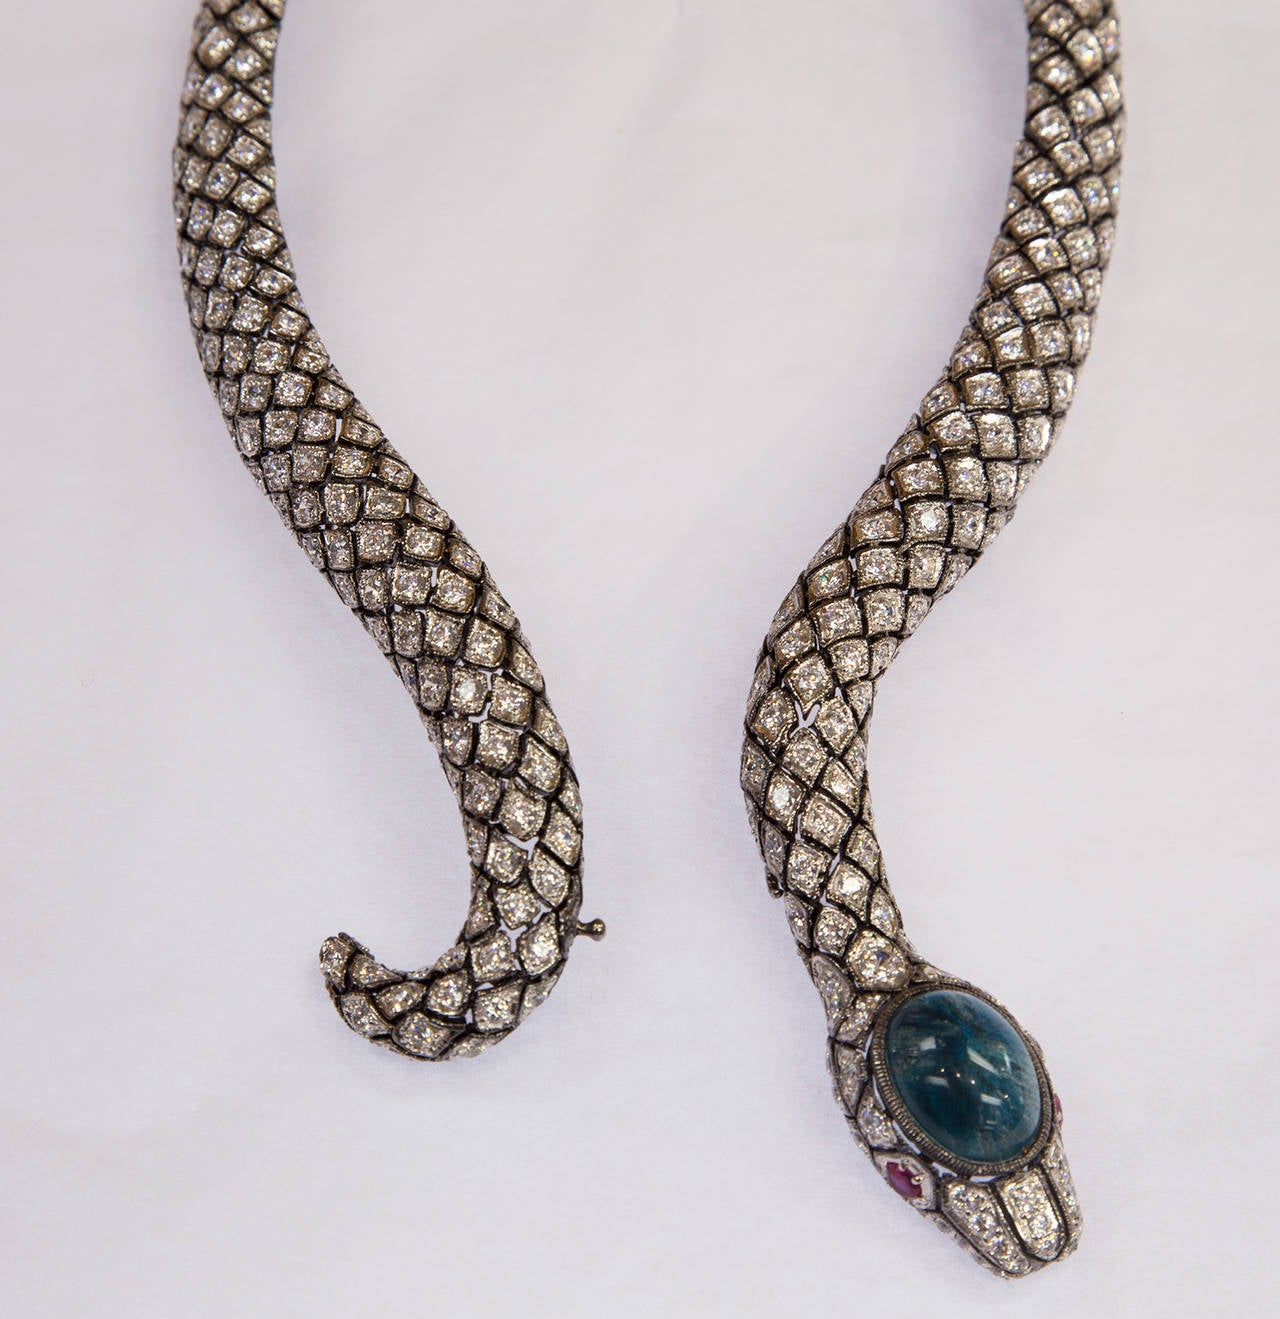 Stunning Sterling Silver signed Serpent Necklace encrusted with Crystals, the head set with a large oval cabochon simulated Emerald stone; all set in sterling silver with black rhodium finish; Approx. 16